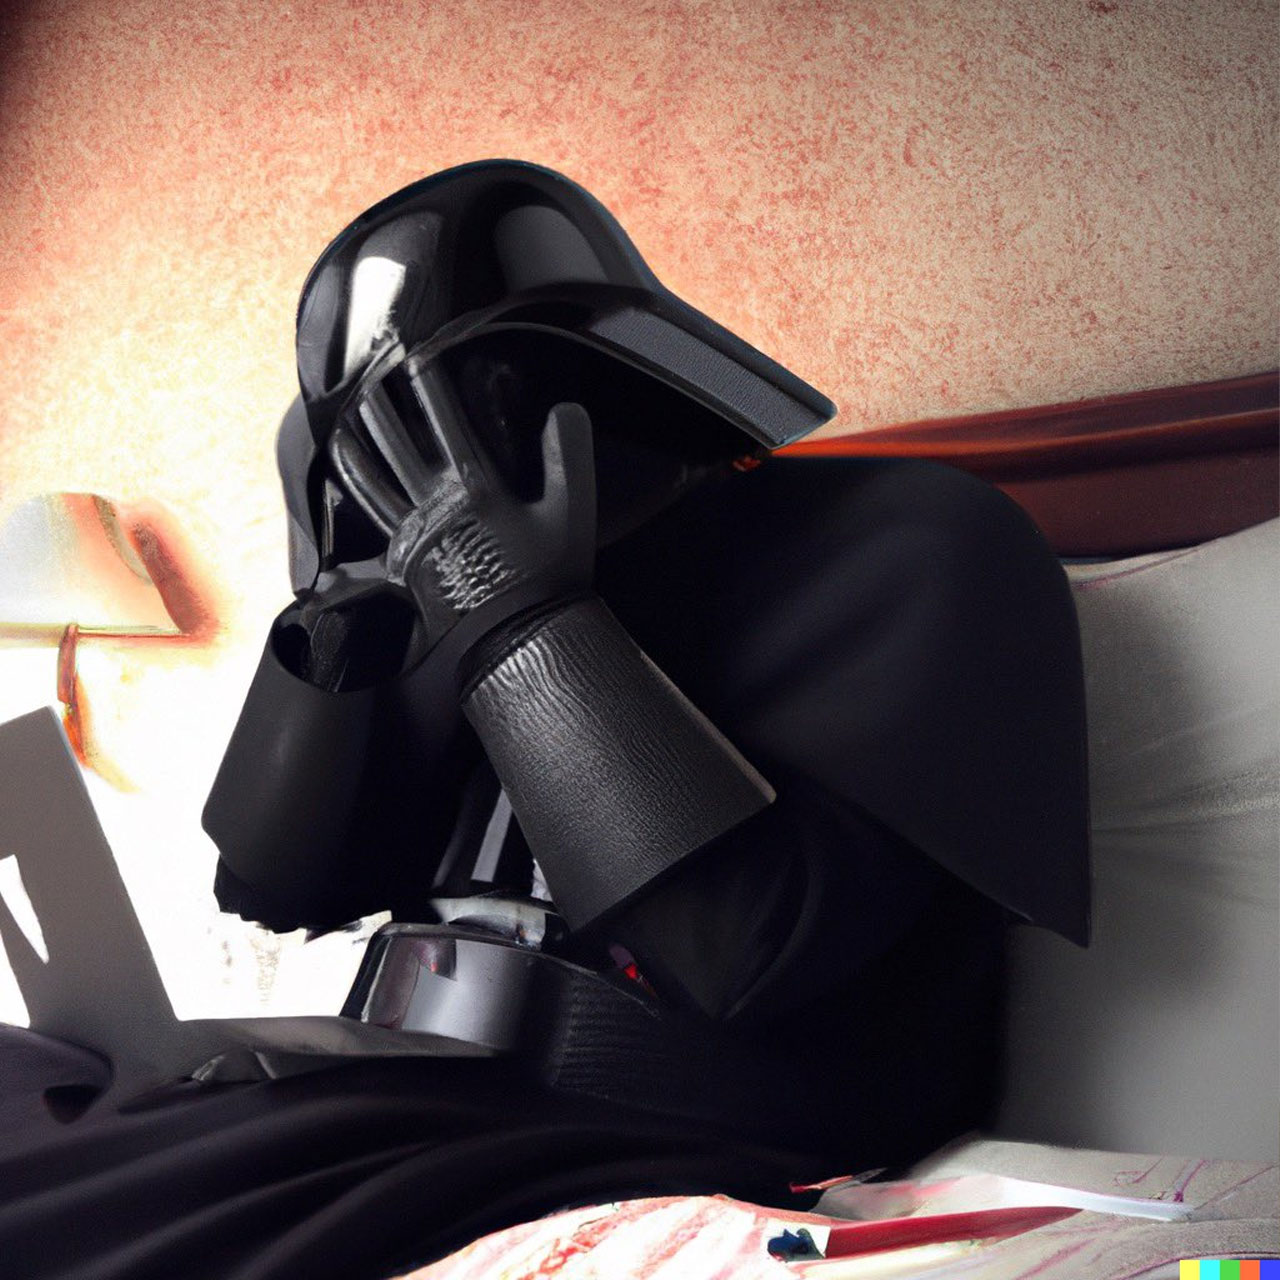 Darth Vader noticed that he was sending an email with no attachments.